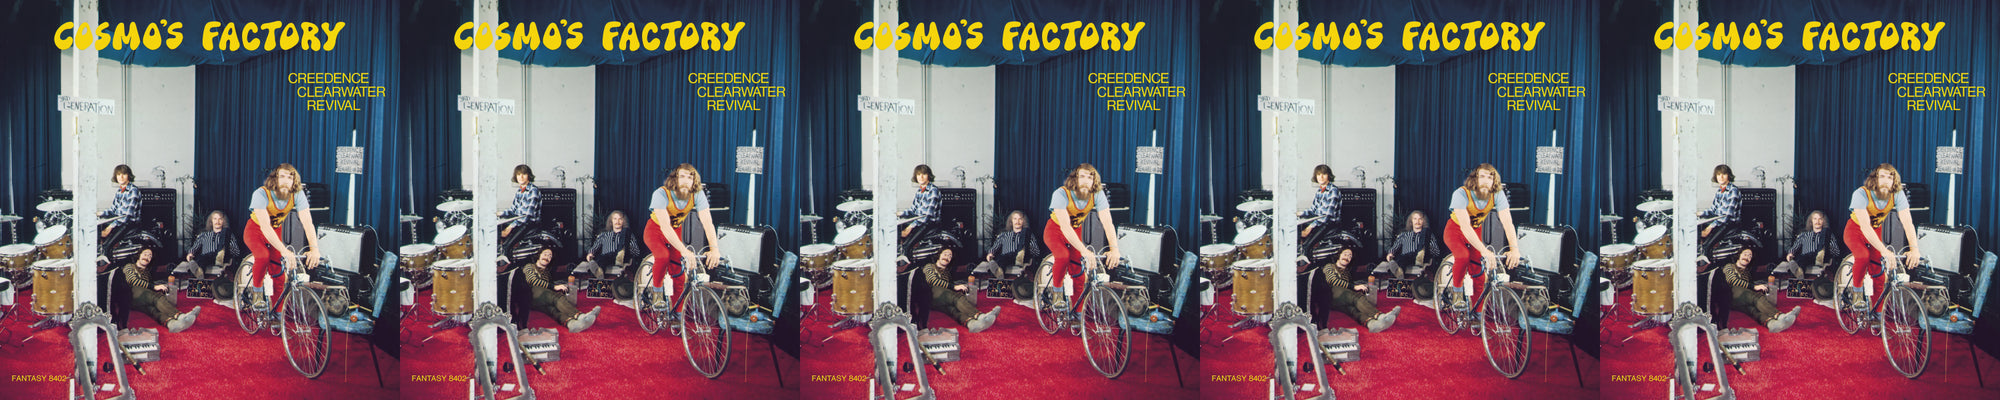 Creedence Clearwater Revival COSMO'S FACTORY